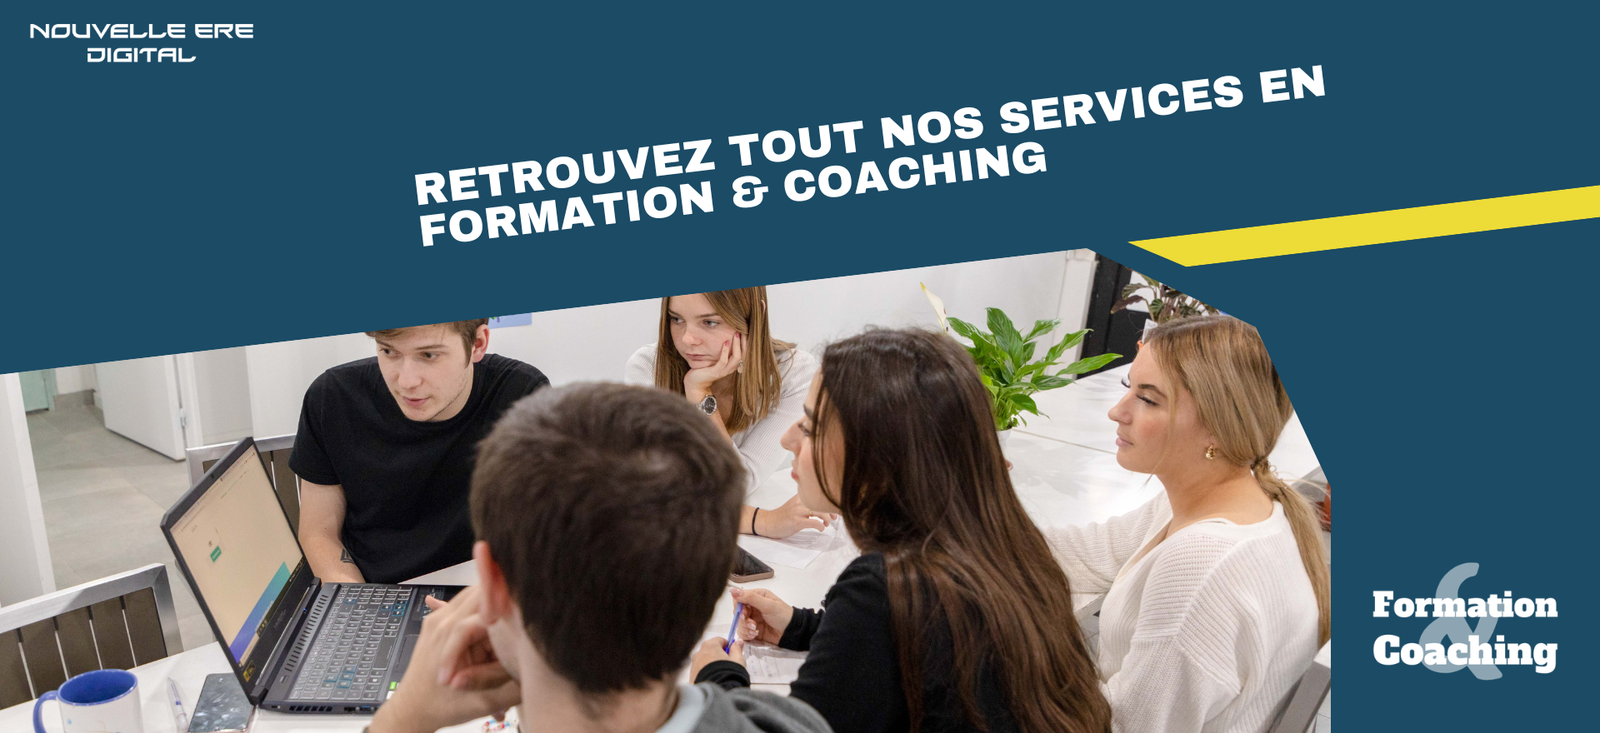 Formation & Coaching